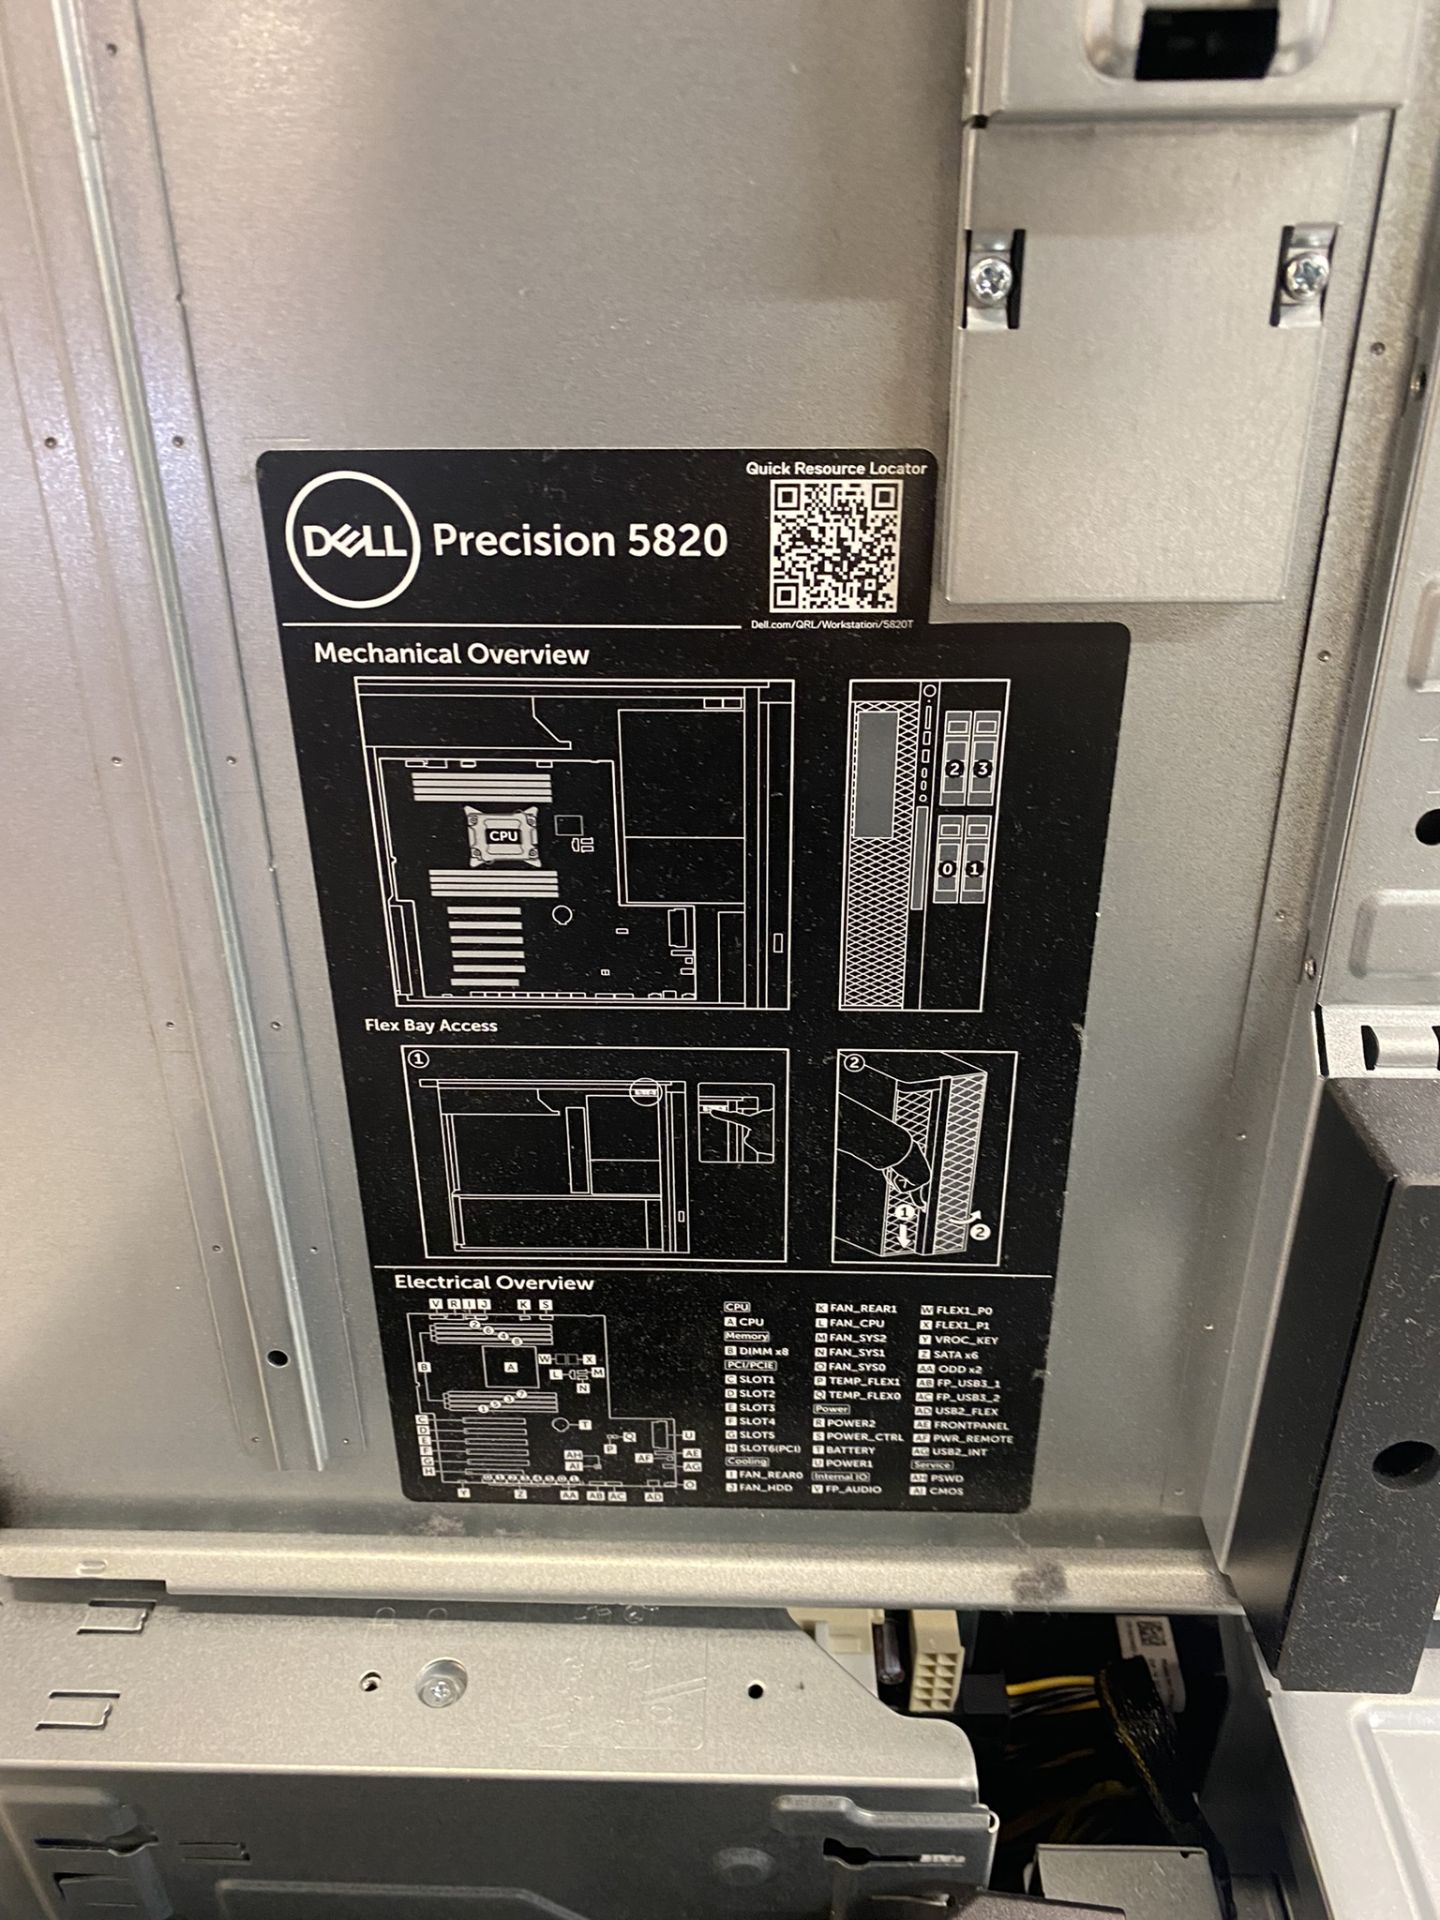 Dell Precision 5820 High Performance Tower Workstation (without harddrive) - Image 6 of 7